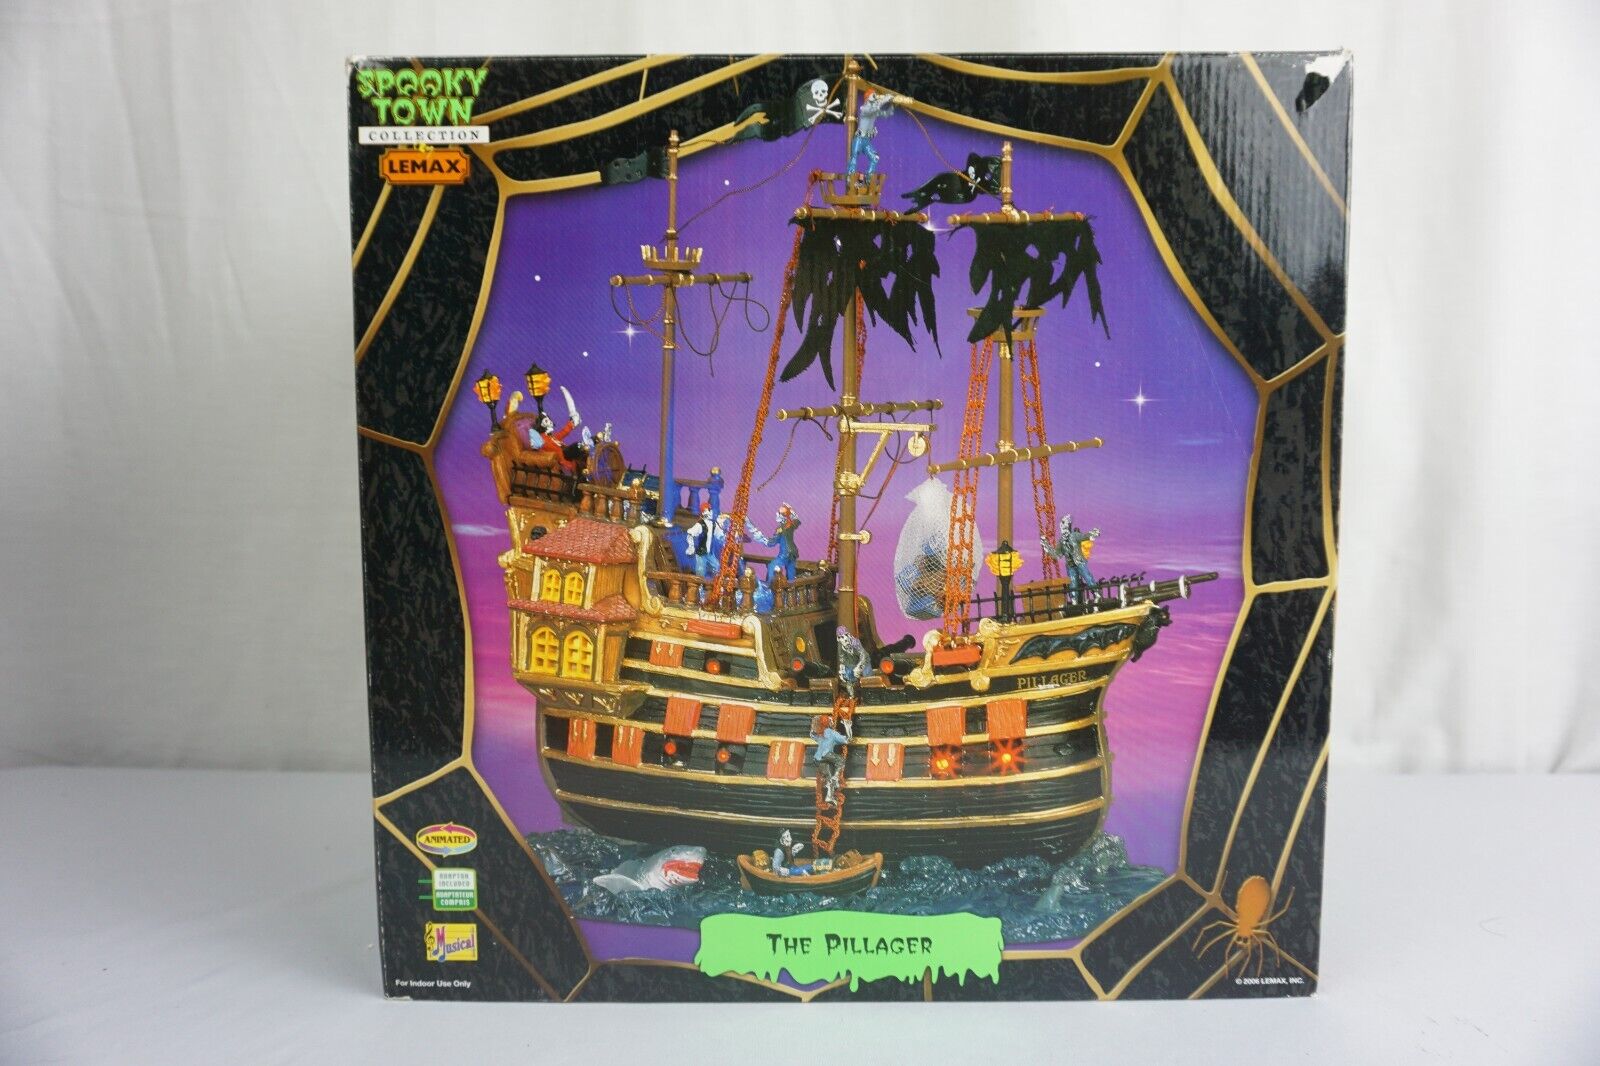 2006 Lemax Spooky Town Halloween The Pillager Pirate Ship #65409